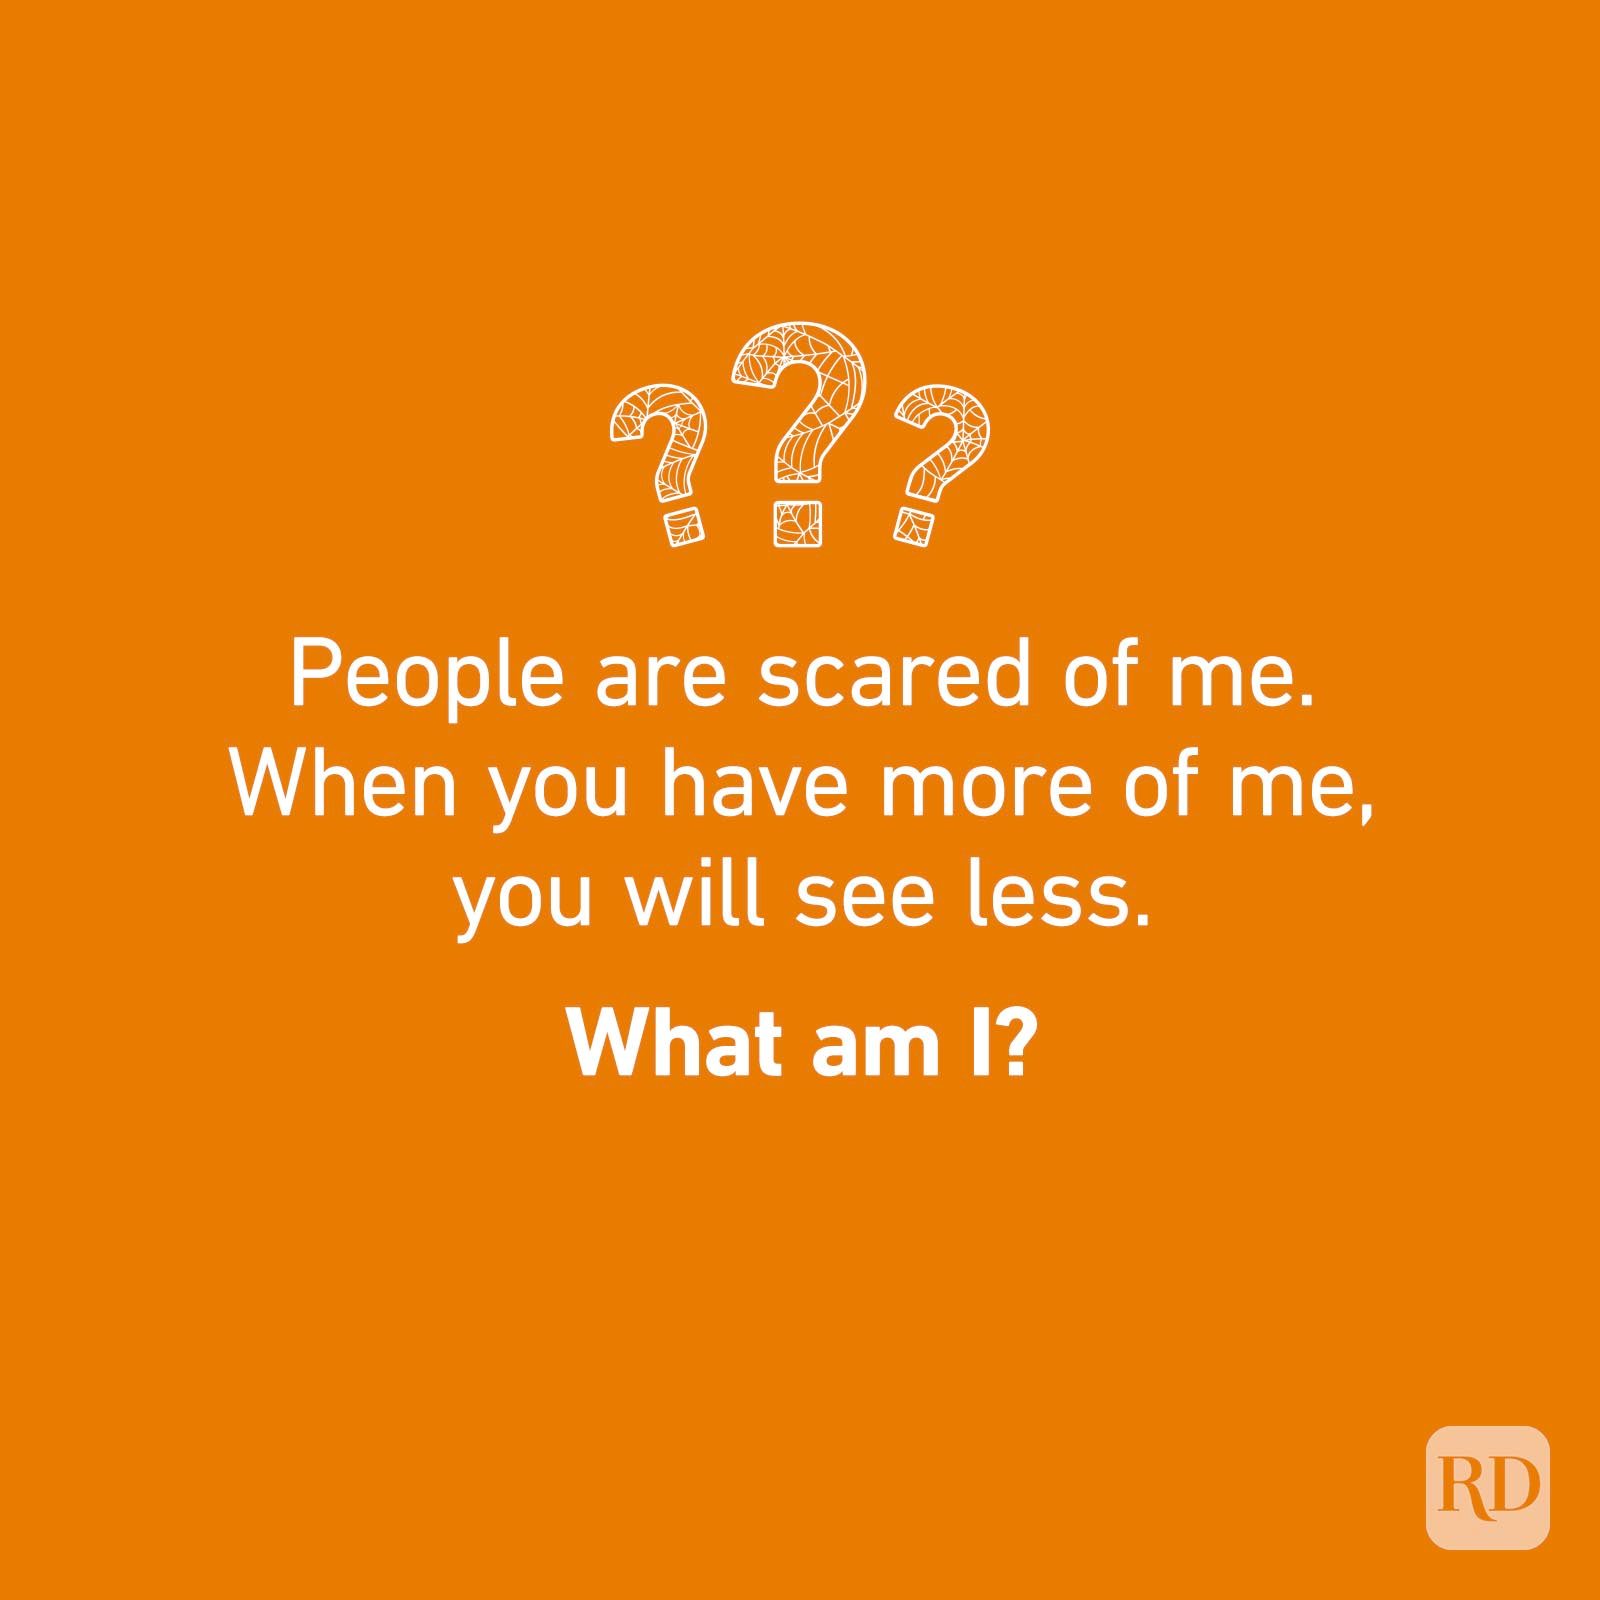 27 Scary-Good Halloween Riddles for All Ages | Reader's Digest